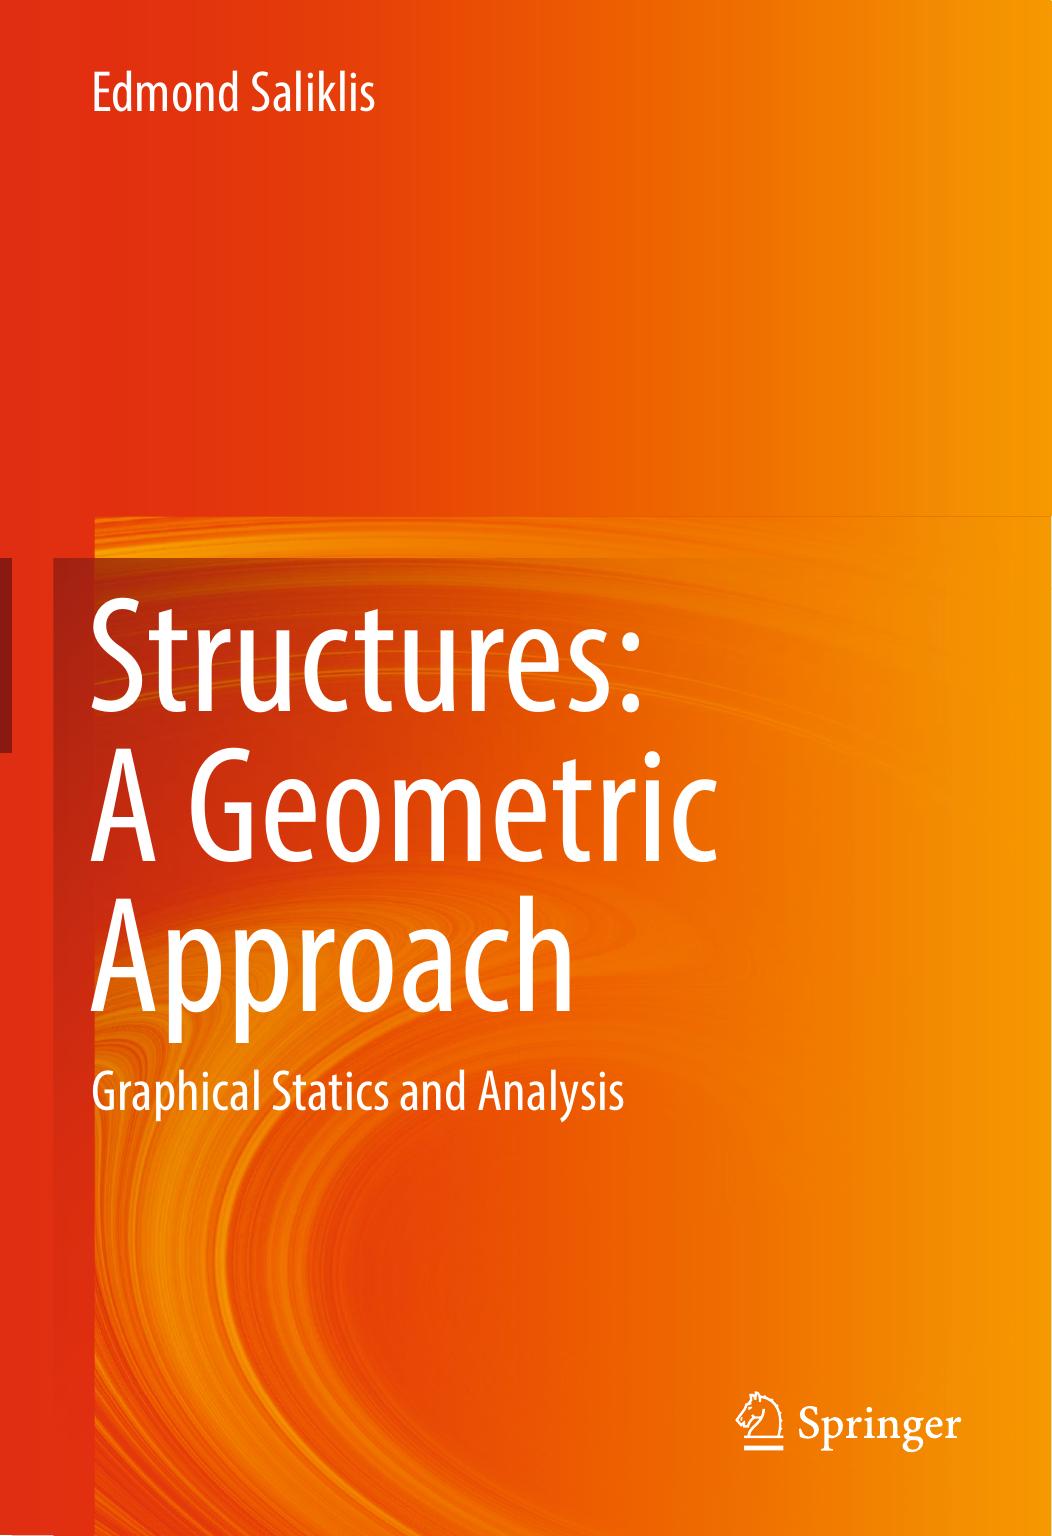 Structures A Geometric Approach Graphical Statics and Analysis 2015